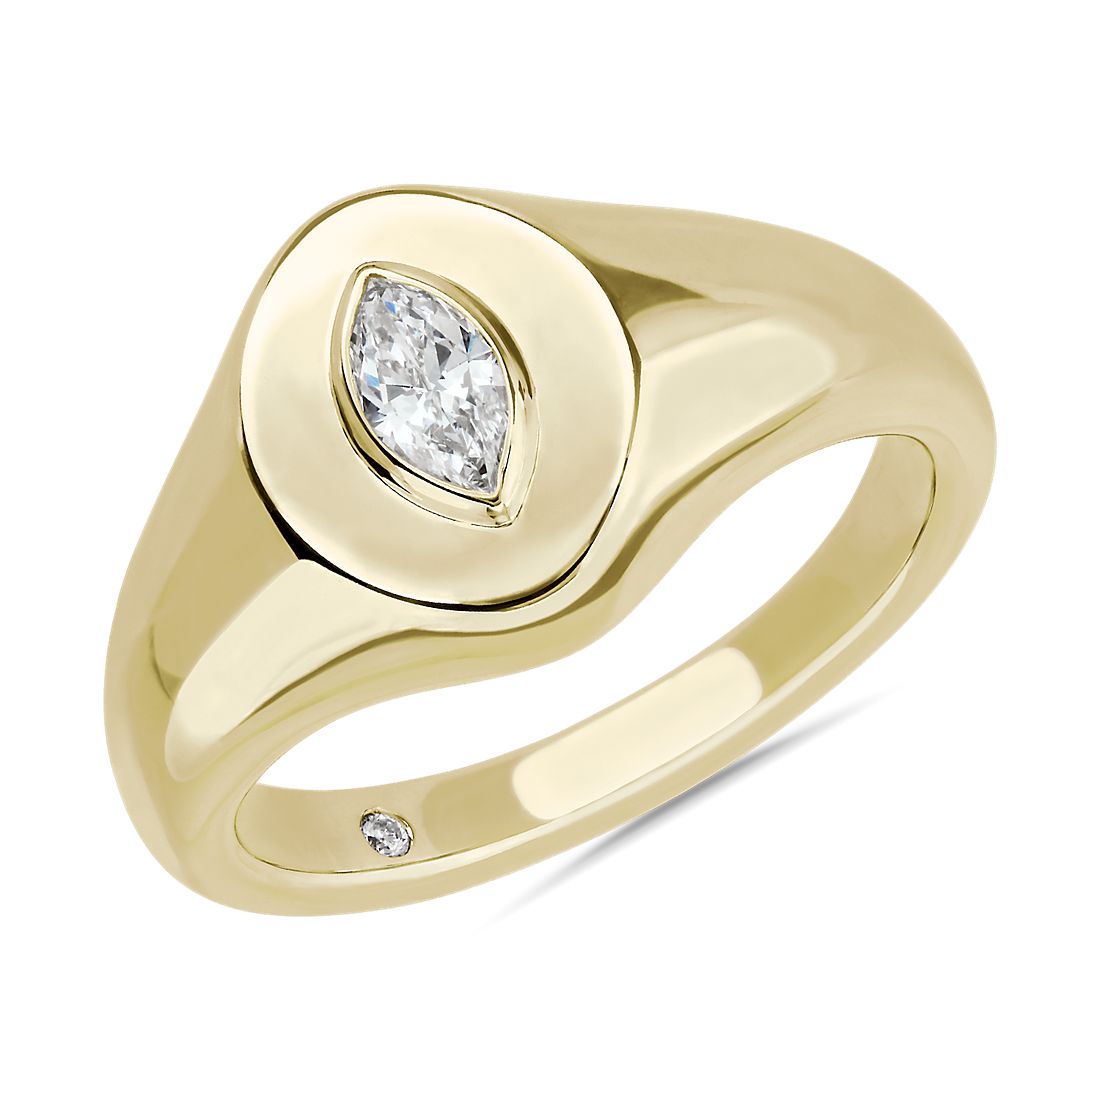 Marquise Diamond Signet Ring in 14k Yellow Gold (1/5 ct. tw.)